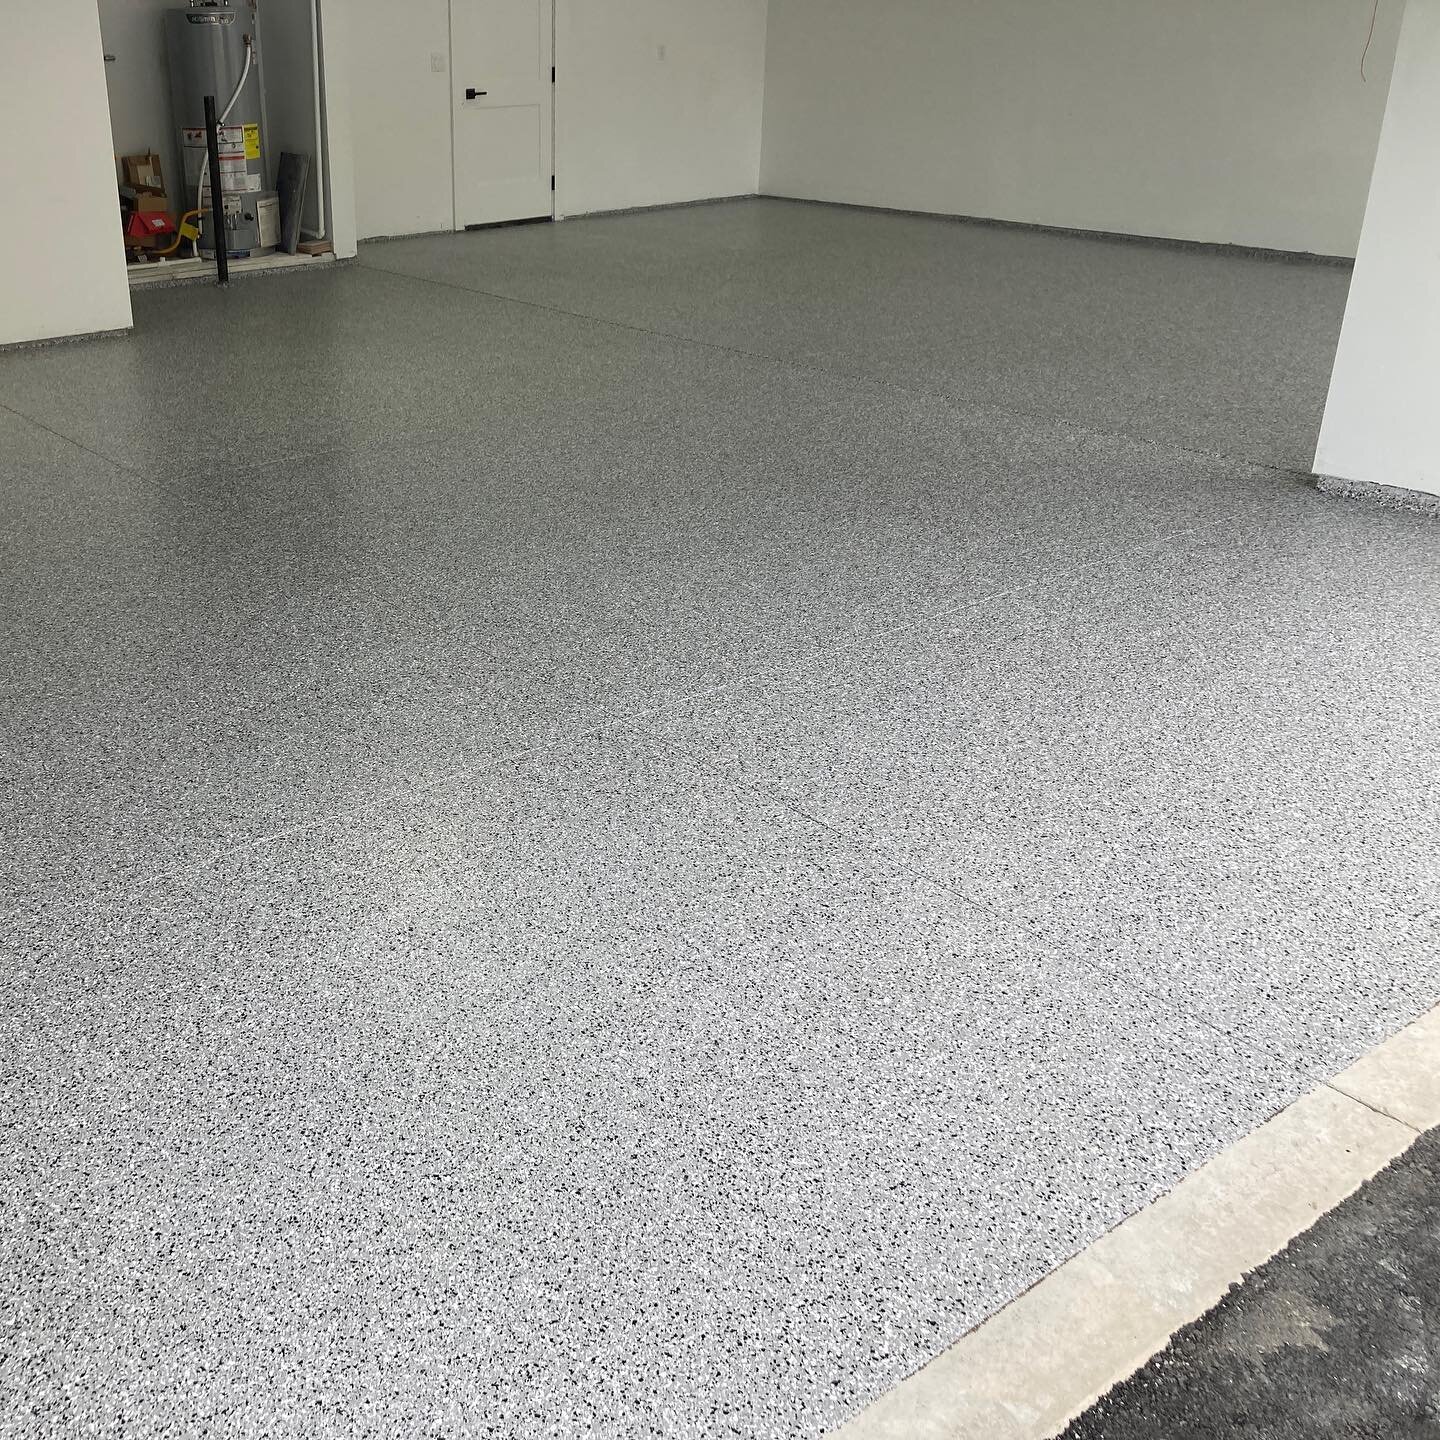 😎Another fresh floor, another happy client!

👌Our team installs with a level of craftsmanship that is unmatched! The pictures speak for themselves!

👉Flake Epoxy System✨
👉Color: GREY🐺
👉Always 💯 

📱call/text: 208-402-8386

#epoxyfloor #epoxyfl